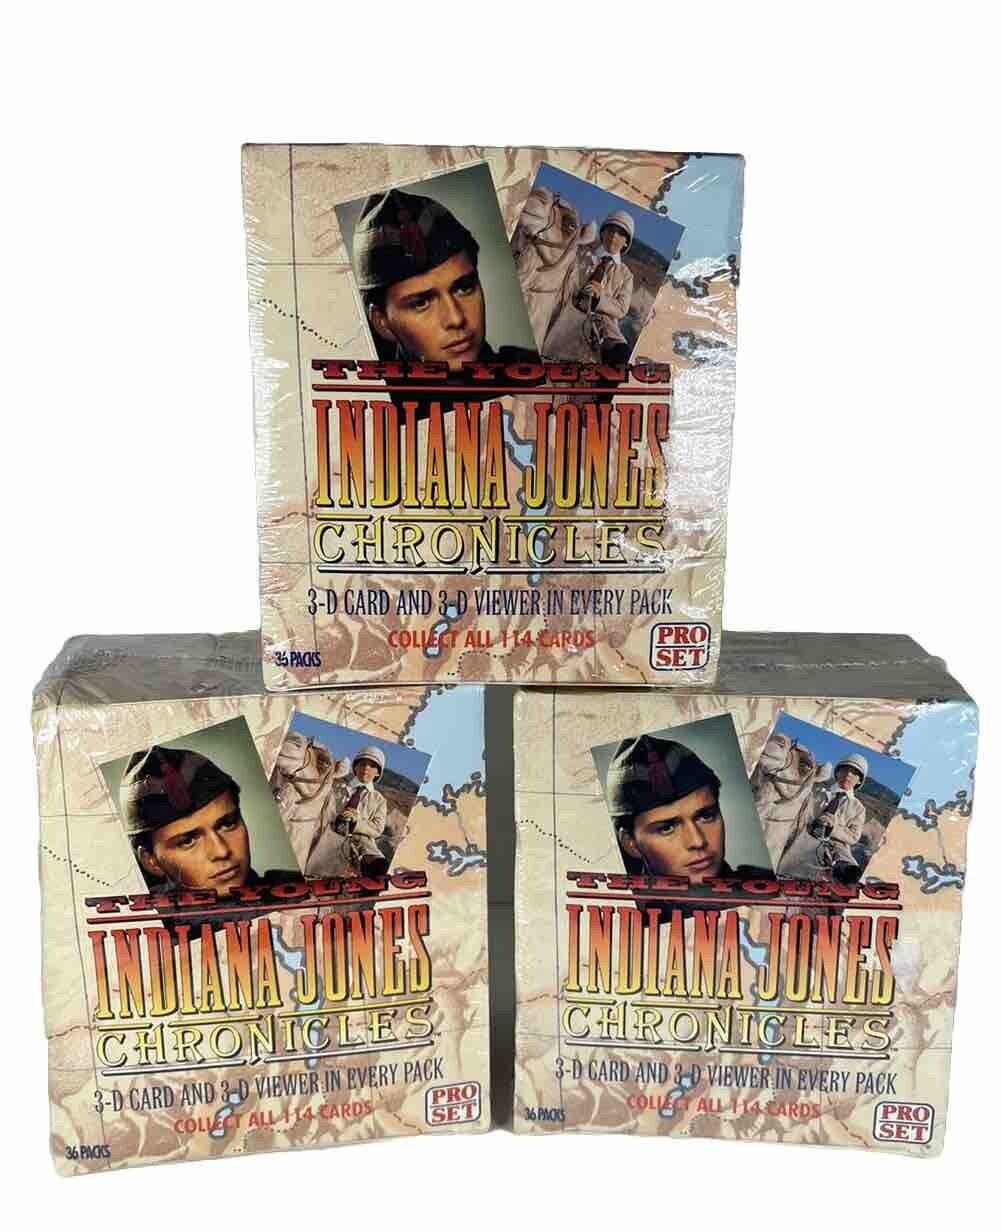 Vintage 1990s YOUNG INDIANA JONES Chronicles Pro Set Cards SEALED BOX LOT OF 3